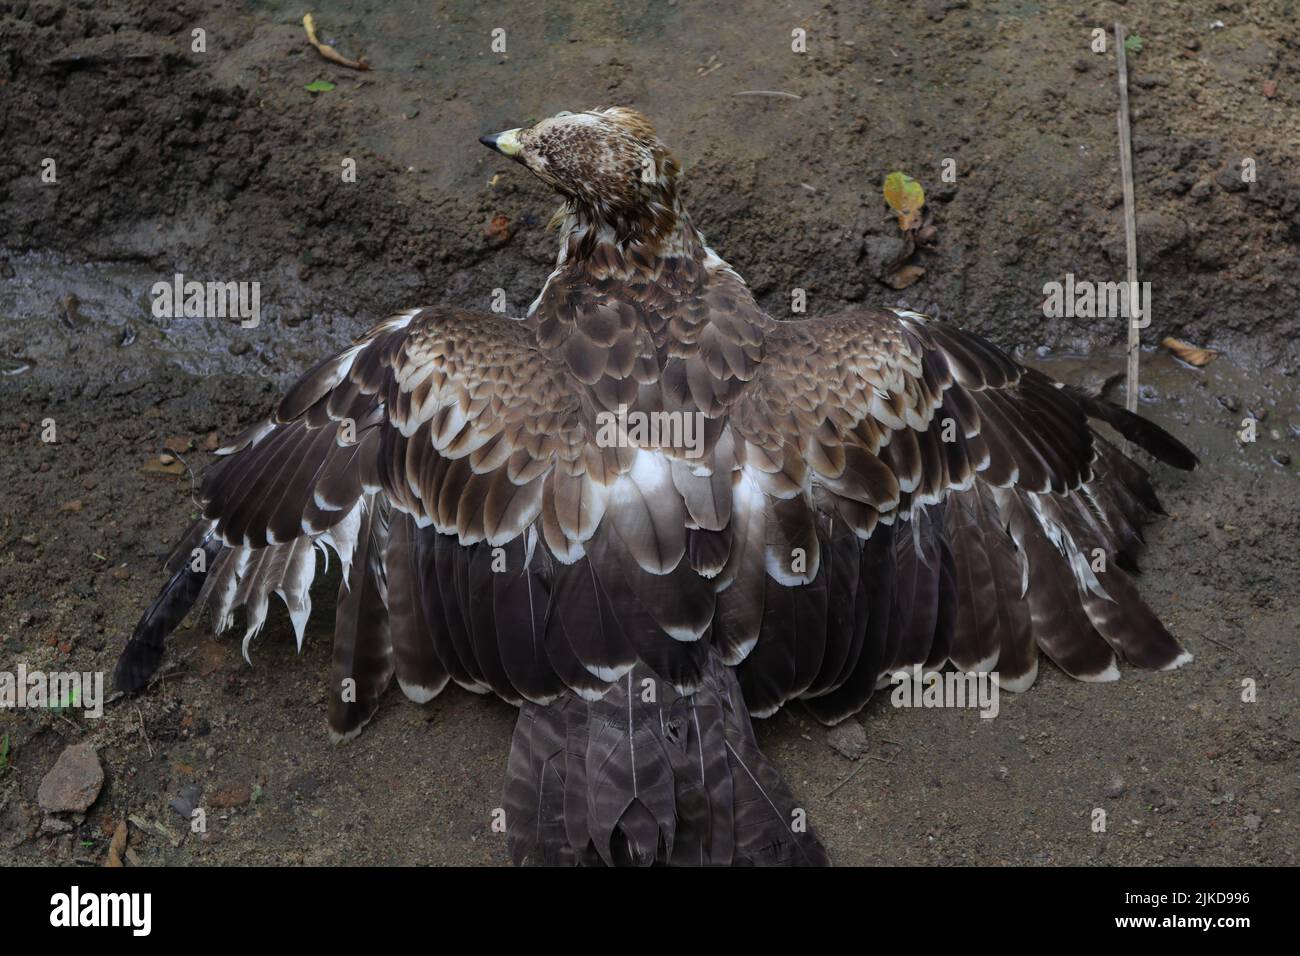 https://c8.alamy.com/comp/2JKD996/a-crested-hawk-eagle-spread-its-wings-after-bath-and-trying-to-feathers-dry-soon-as-possible-view-from-the-back-2JKD996.jpg